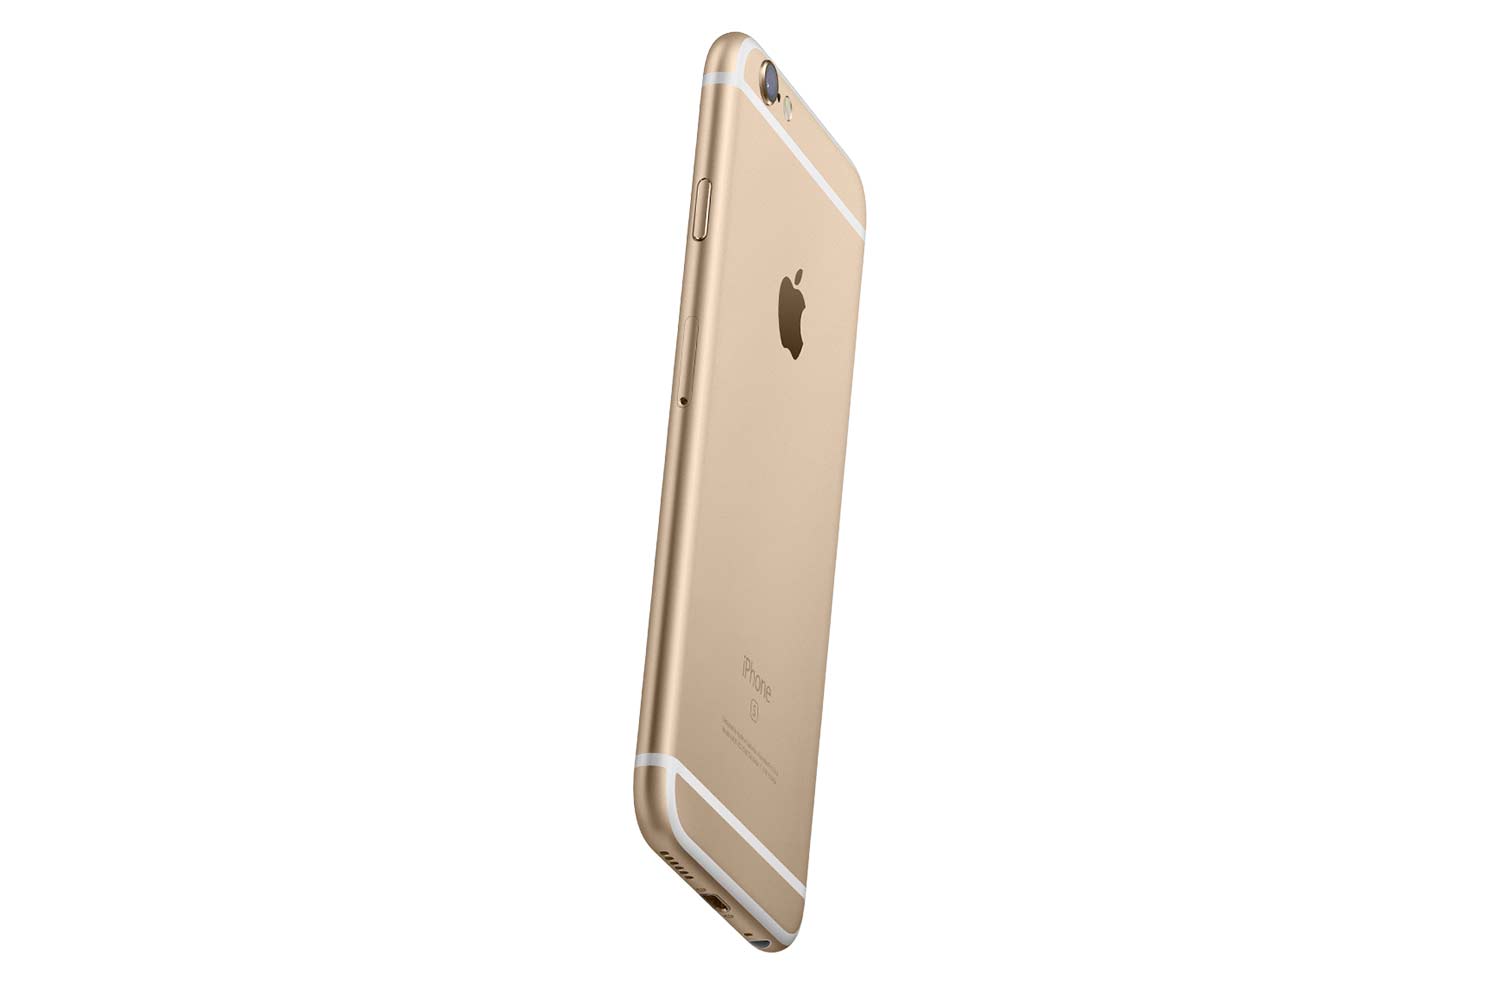 iphone 6s news hero gold large